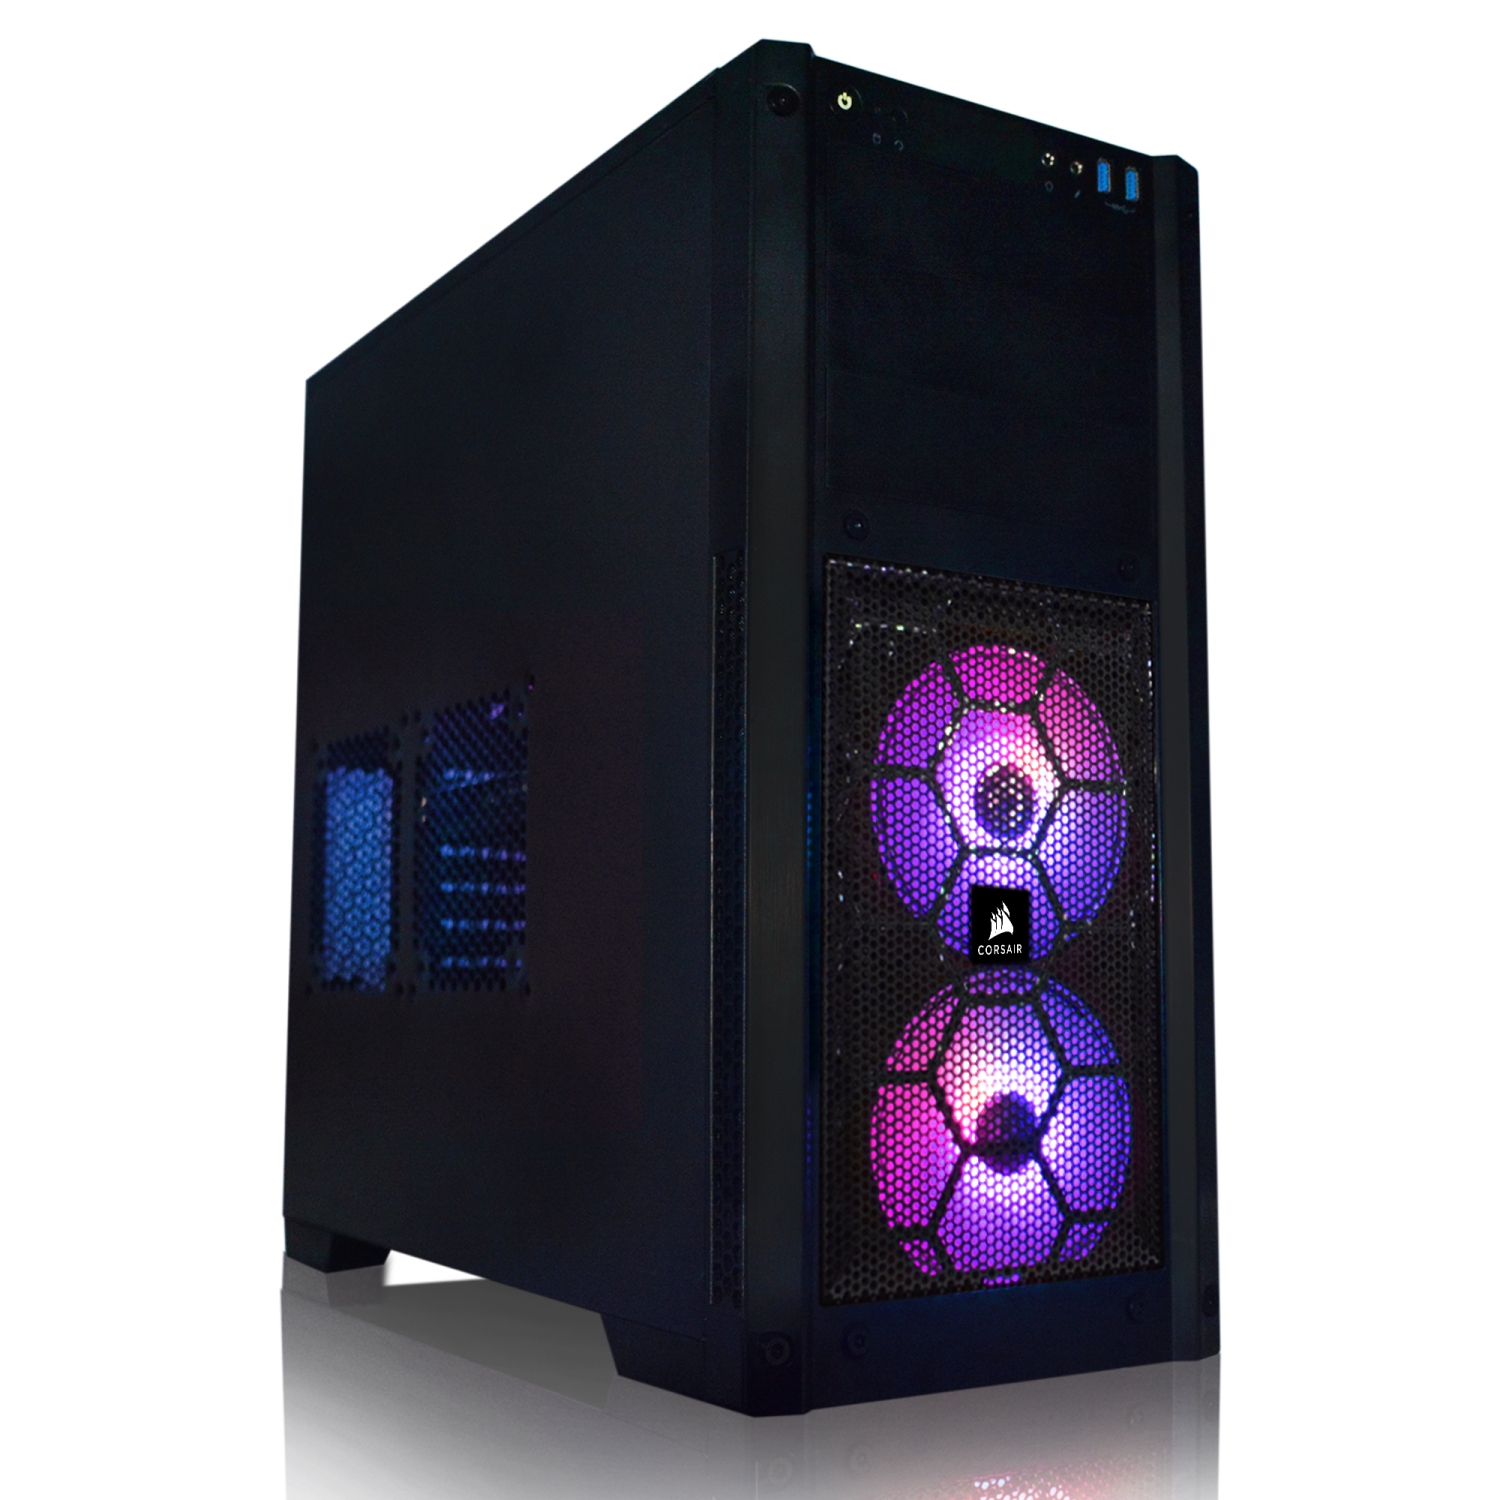 Refurbished (Good) - Gaming PC AMD 8-Core FX upto 4.2GHz Processor 16GB RAM 512GB SSD Radeon RX550 4GB DDR5 ASUS Motherboard Corsair Chassis RGB KB/Mouse Windows 10 WiFi